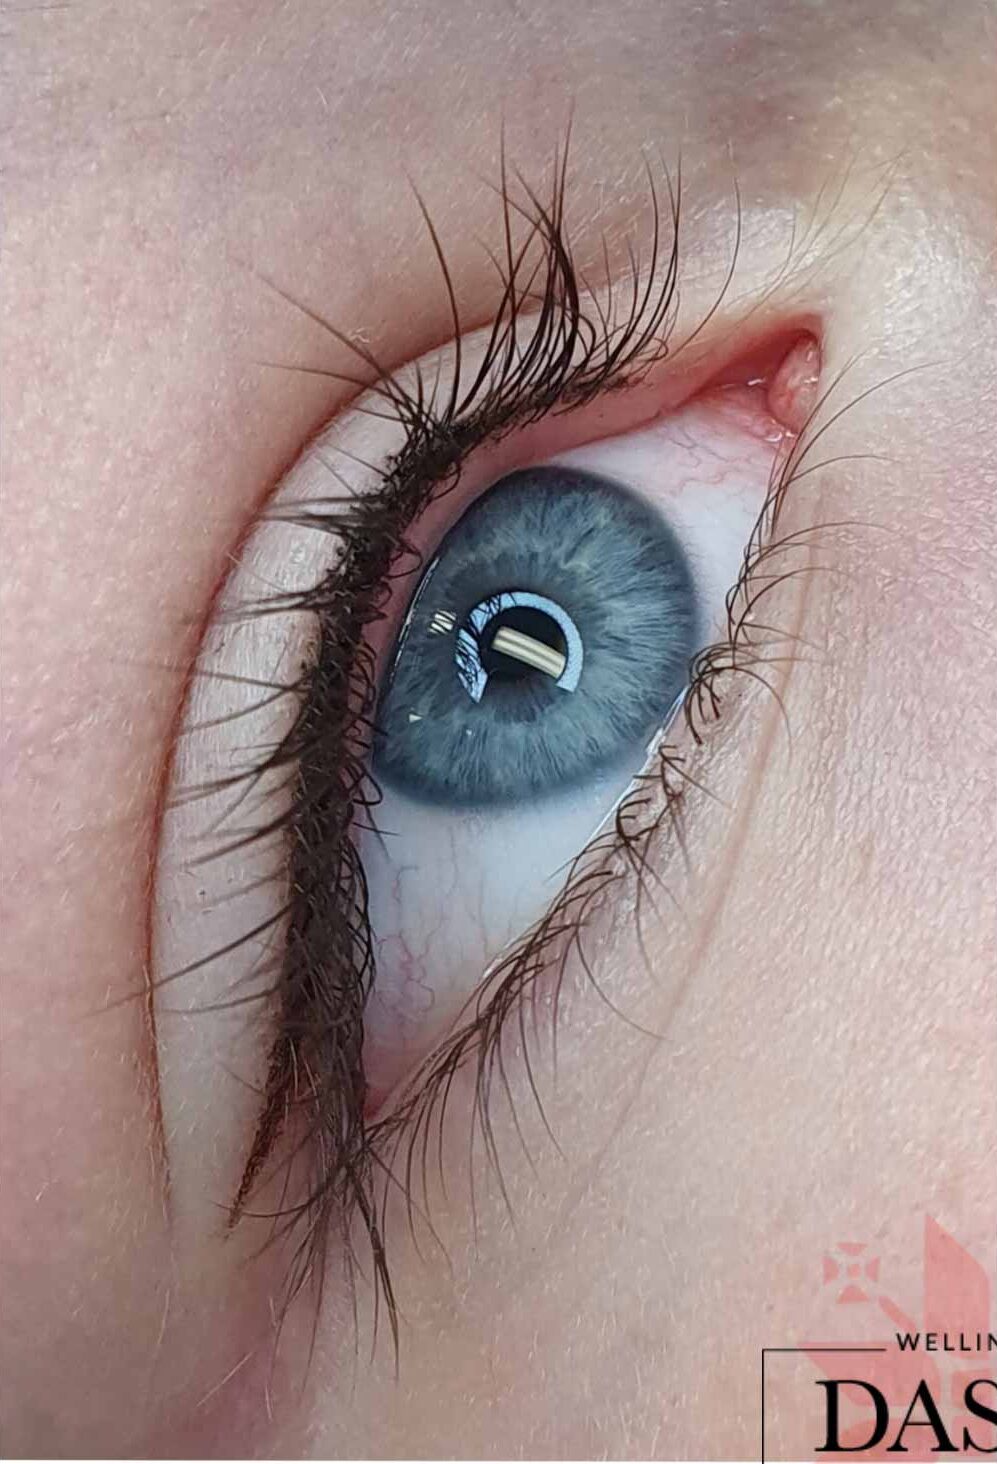 Eyeliner Permanent Makeup. Cosmetic and Mediical Tattoo by Dasha. Permanent makeup and reconstructive tattoo, scalp micro-pigmentation in Christchurch, New Zealand